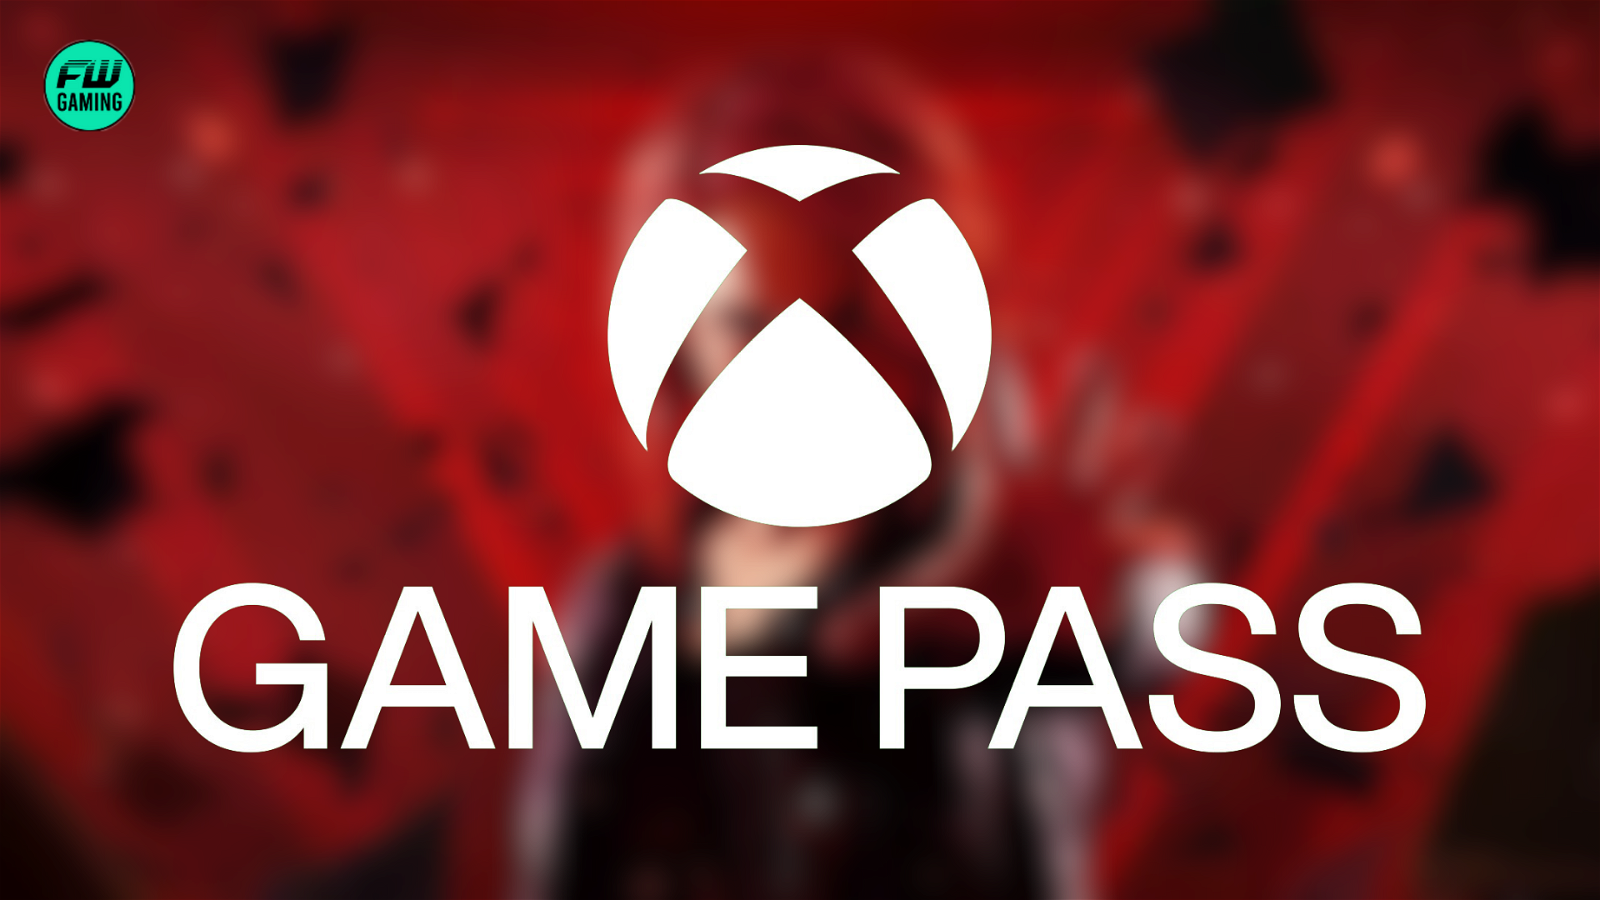 Xbox Game Pass Just Got a Whole Lot Better With Remedy's Biggest Game Jumping on Board